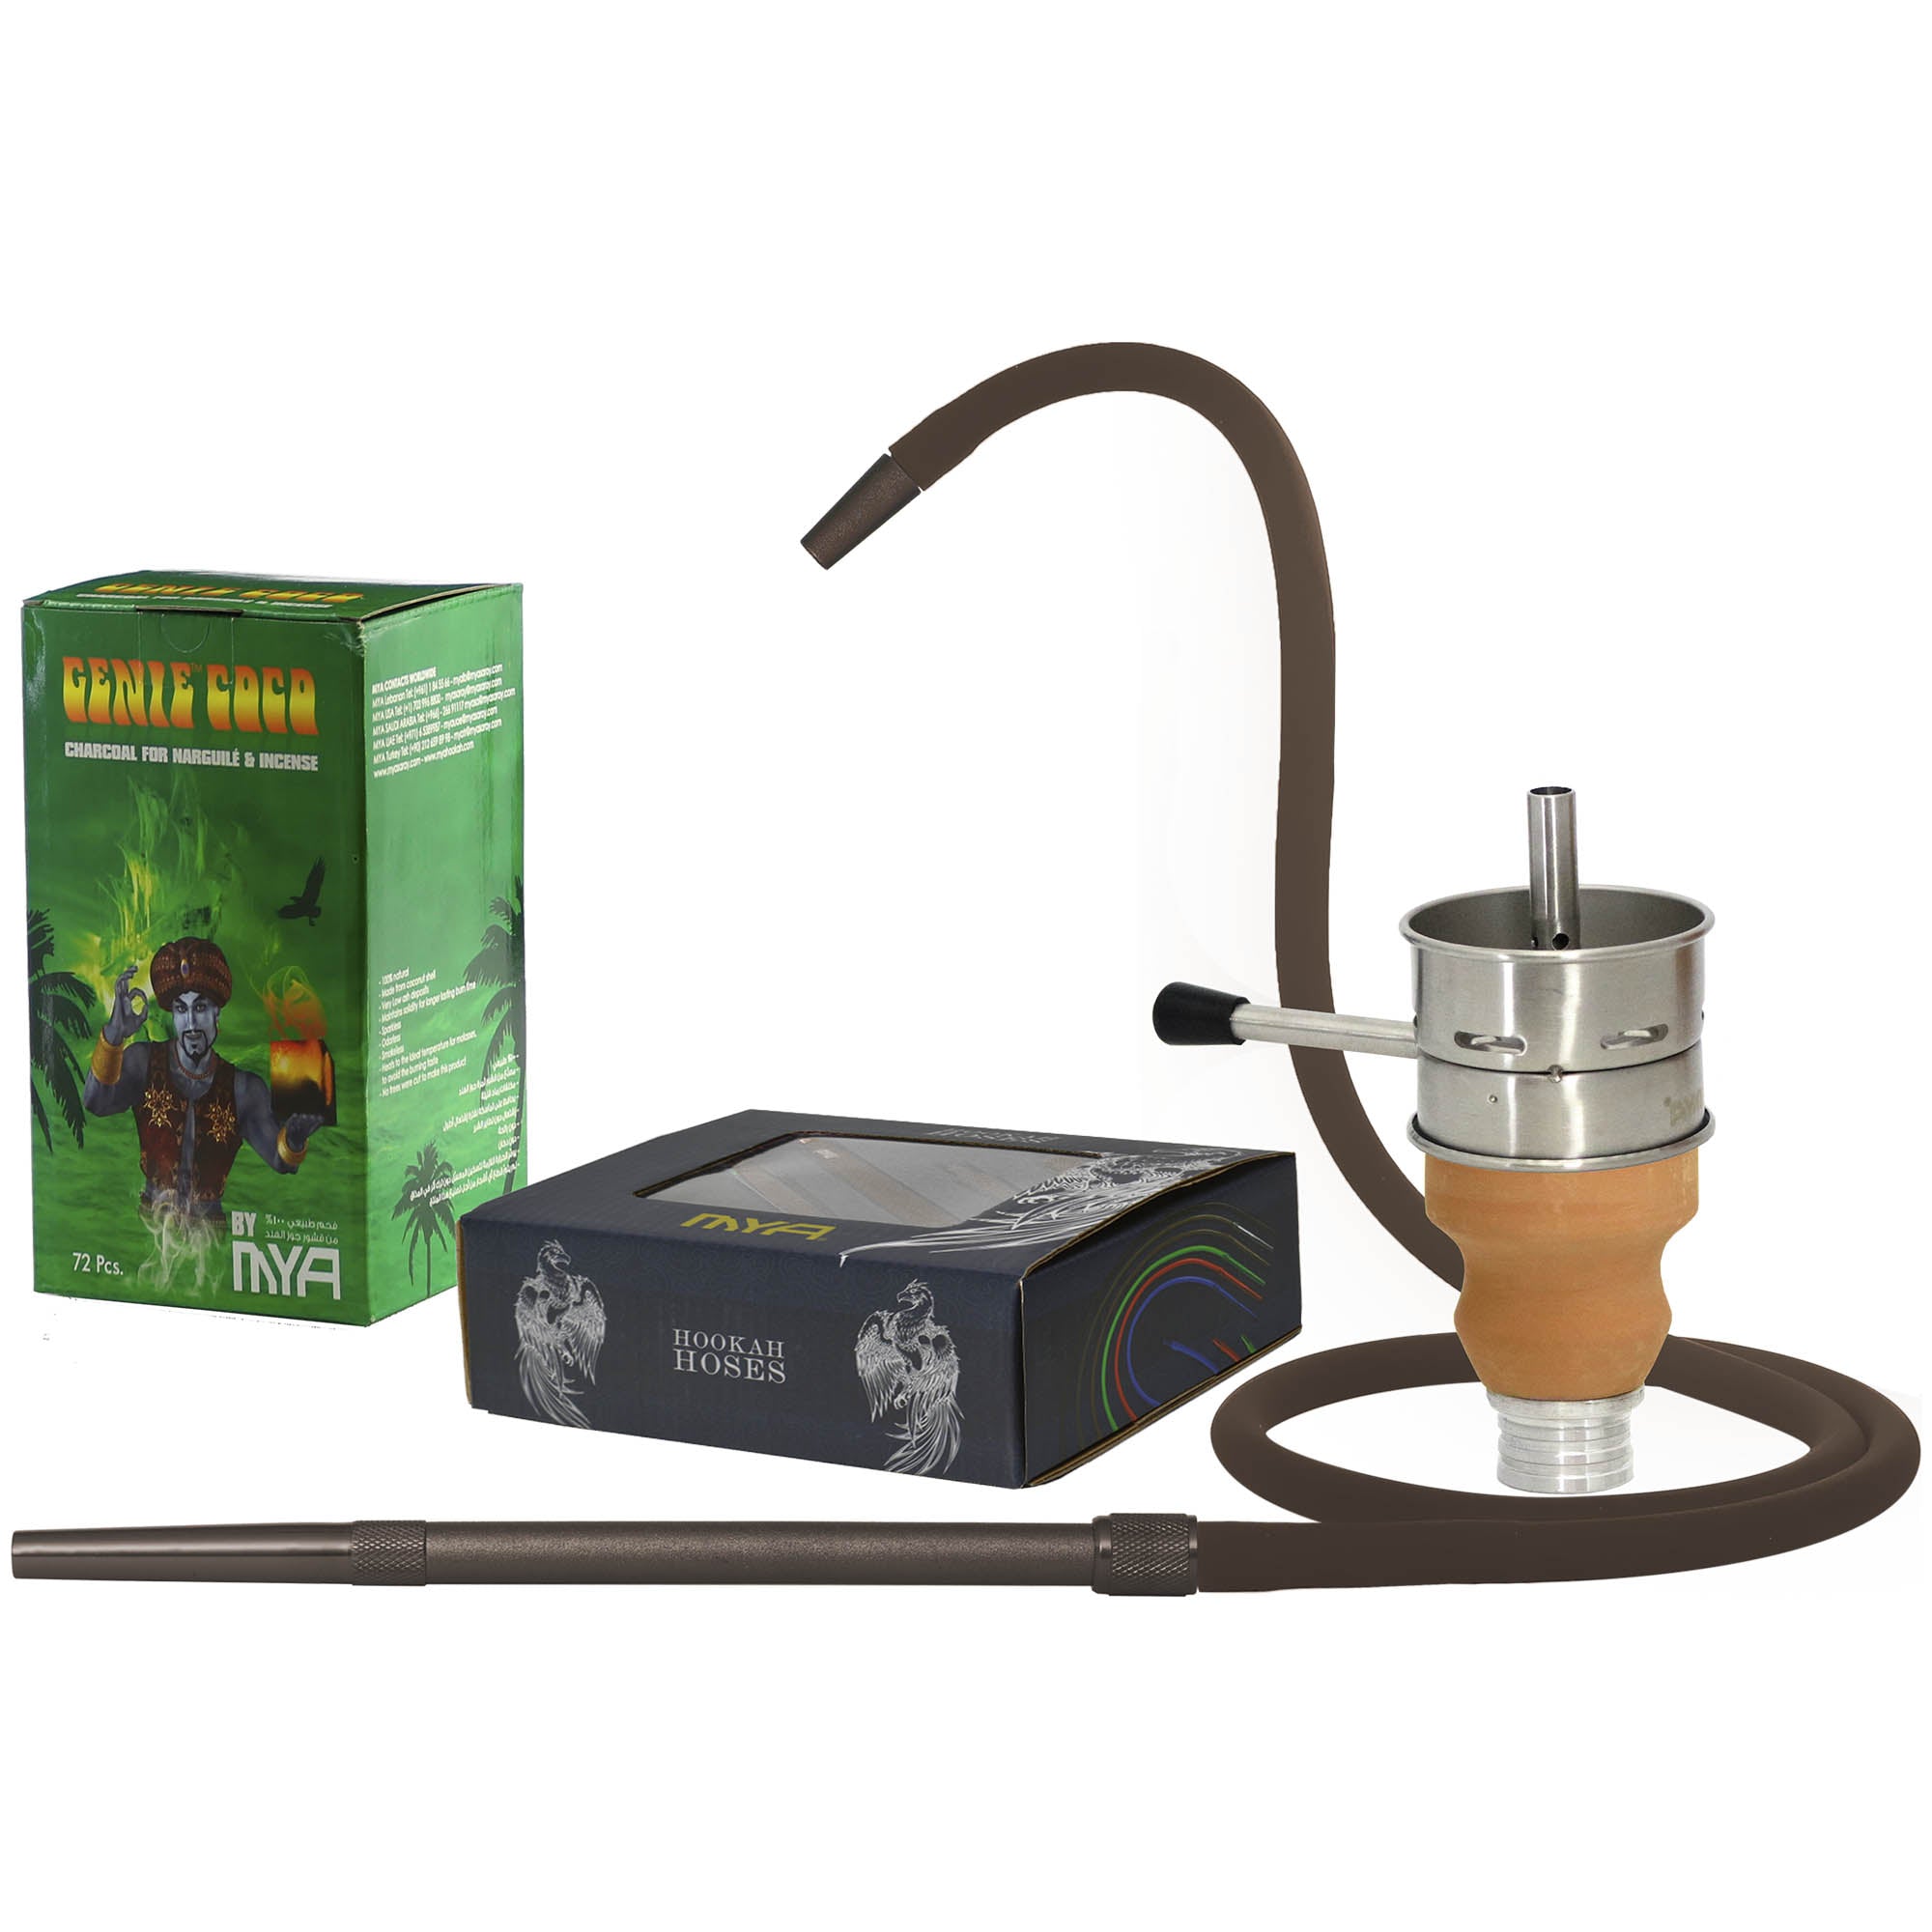 Accessories set includes Green Genie Coco 72 pieces charcoal, brown 668 hose and a Fornello +980L Set #Color_Brown